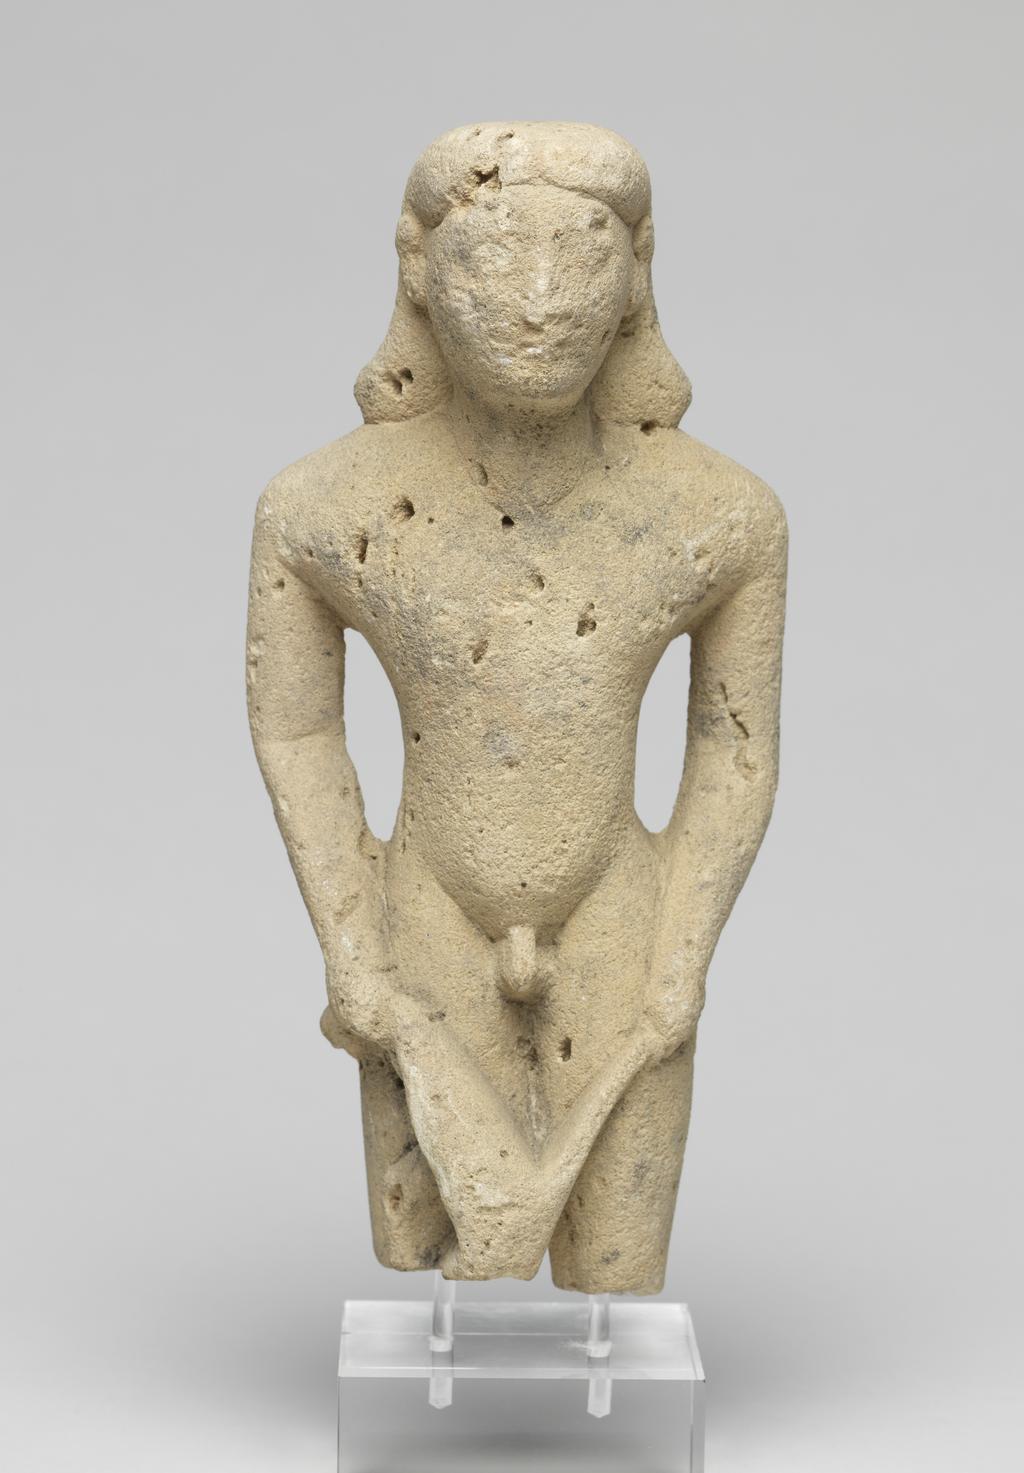 An image of Figure/Statuette. Man, grappling with lion. Production Place: Cyprus. Find Spot: Salamis, Cyprus. Limestone, height 0.175 m, 600-501 B.C. Archaic Period.